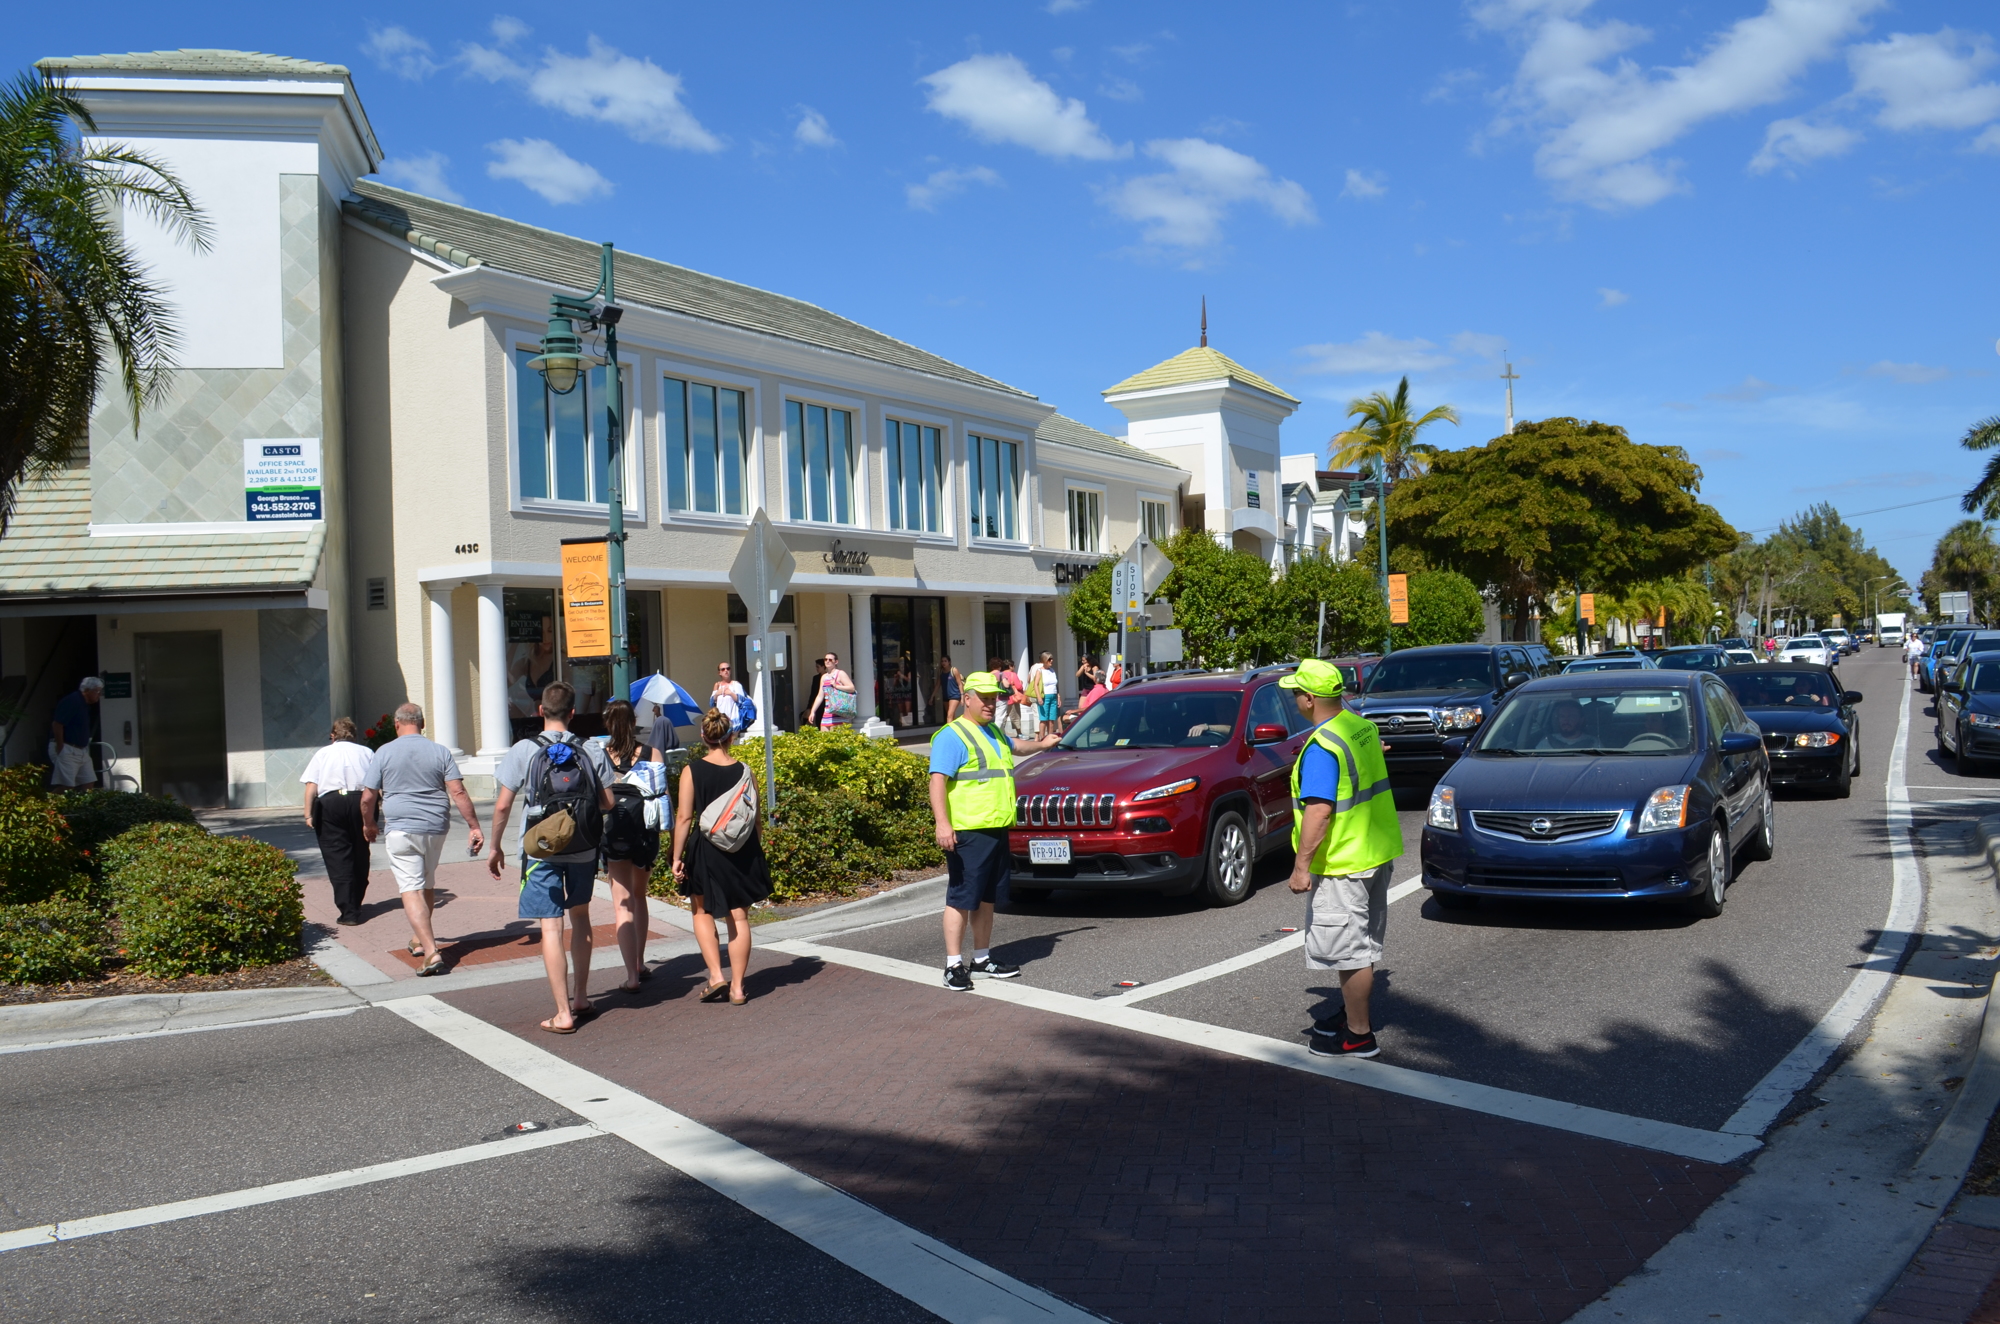 Other than a trial period of stationing crossing guards at Circle crosswalks, St. Armands stakeholders said it has been difficult getting the state to undertake traffic improvements in the area.